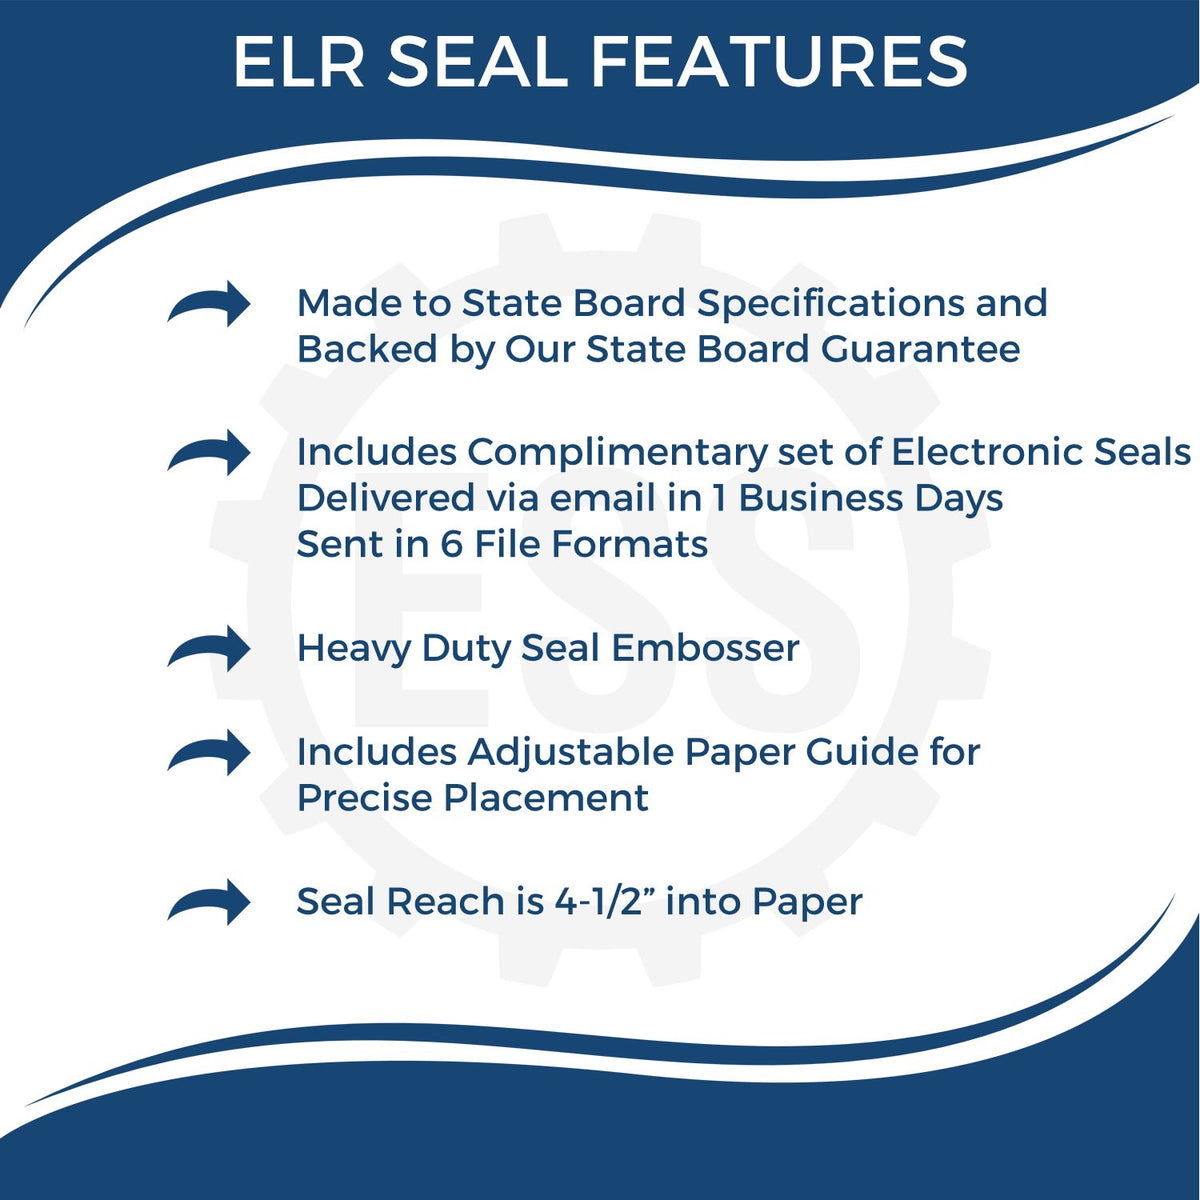 A picture of an infographic highlighting the selling points for the State of Guam Extended Long Reach Engineer Seal